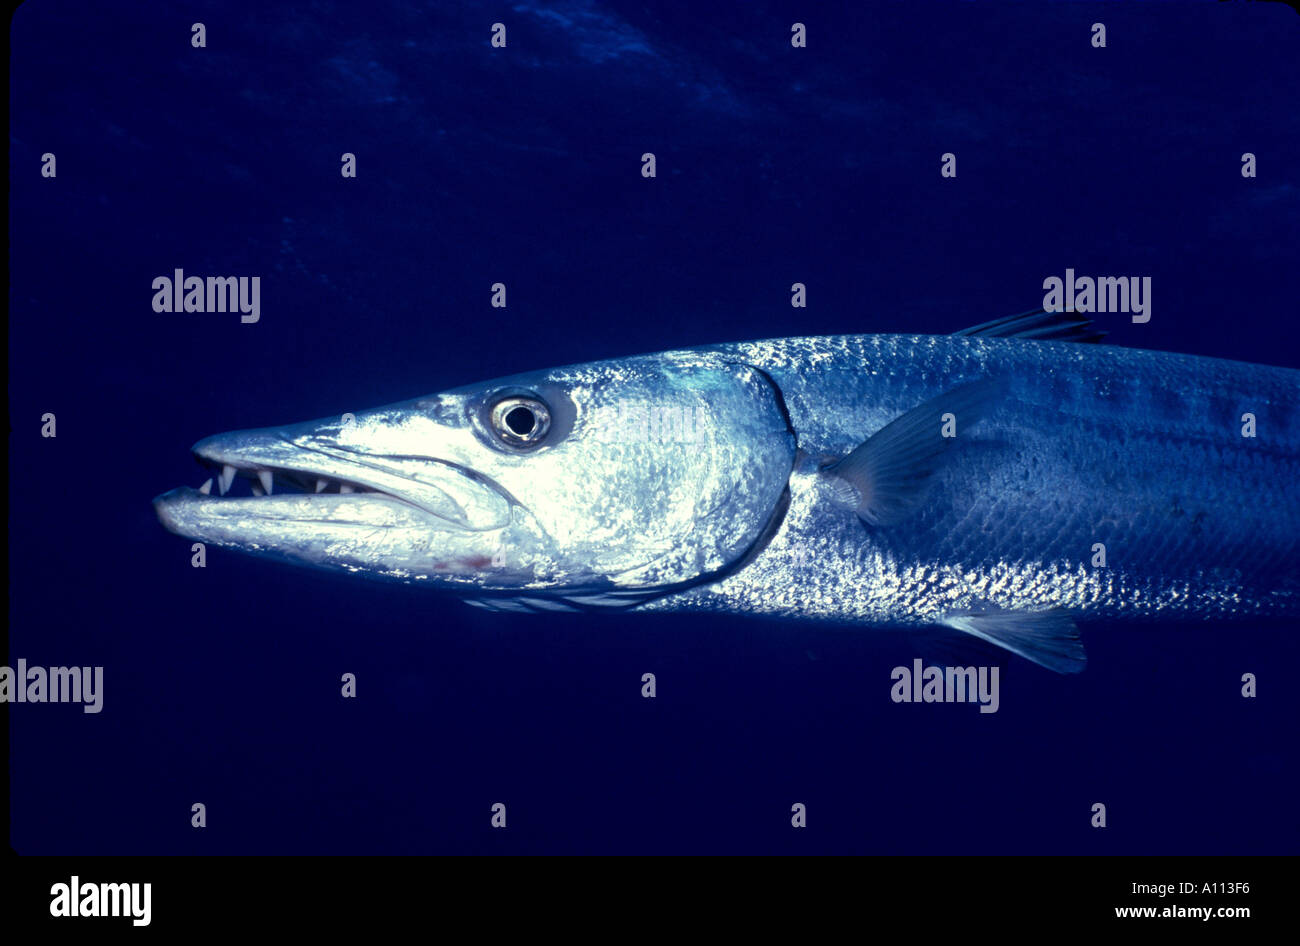 A LOOK AT THE FACE AND TEETH OF A GREAT BARRACUDA Sphyraena barracuda IN THE WATERS OF THE CARIBBEAN Stock Photo